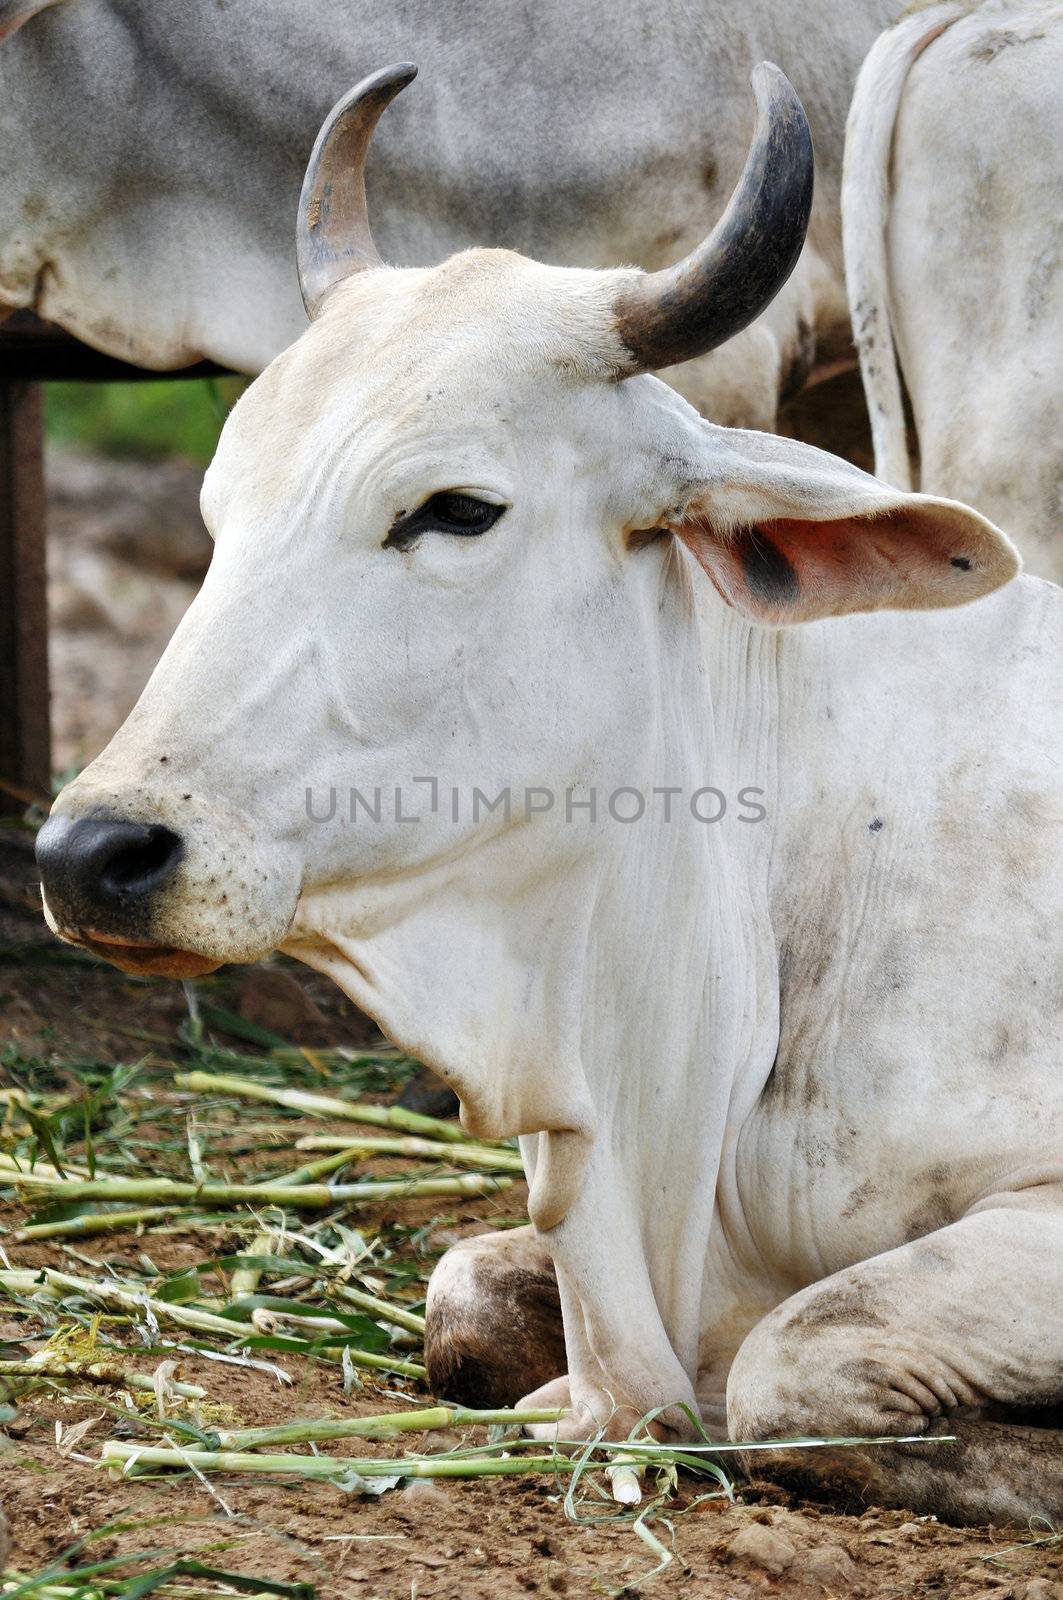 The American Brahman has a distinct large hump over the top of the shoulder and neck, and a loose flap of skin (dewlap) hanging from the neck.